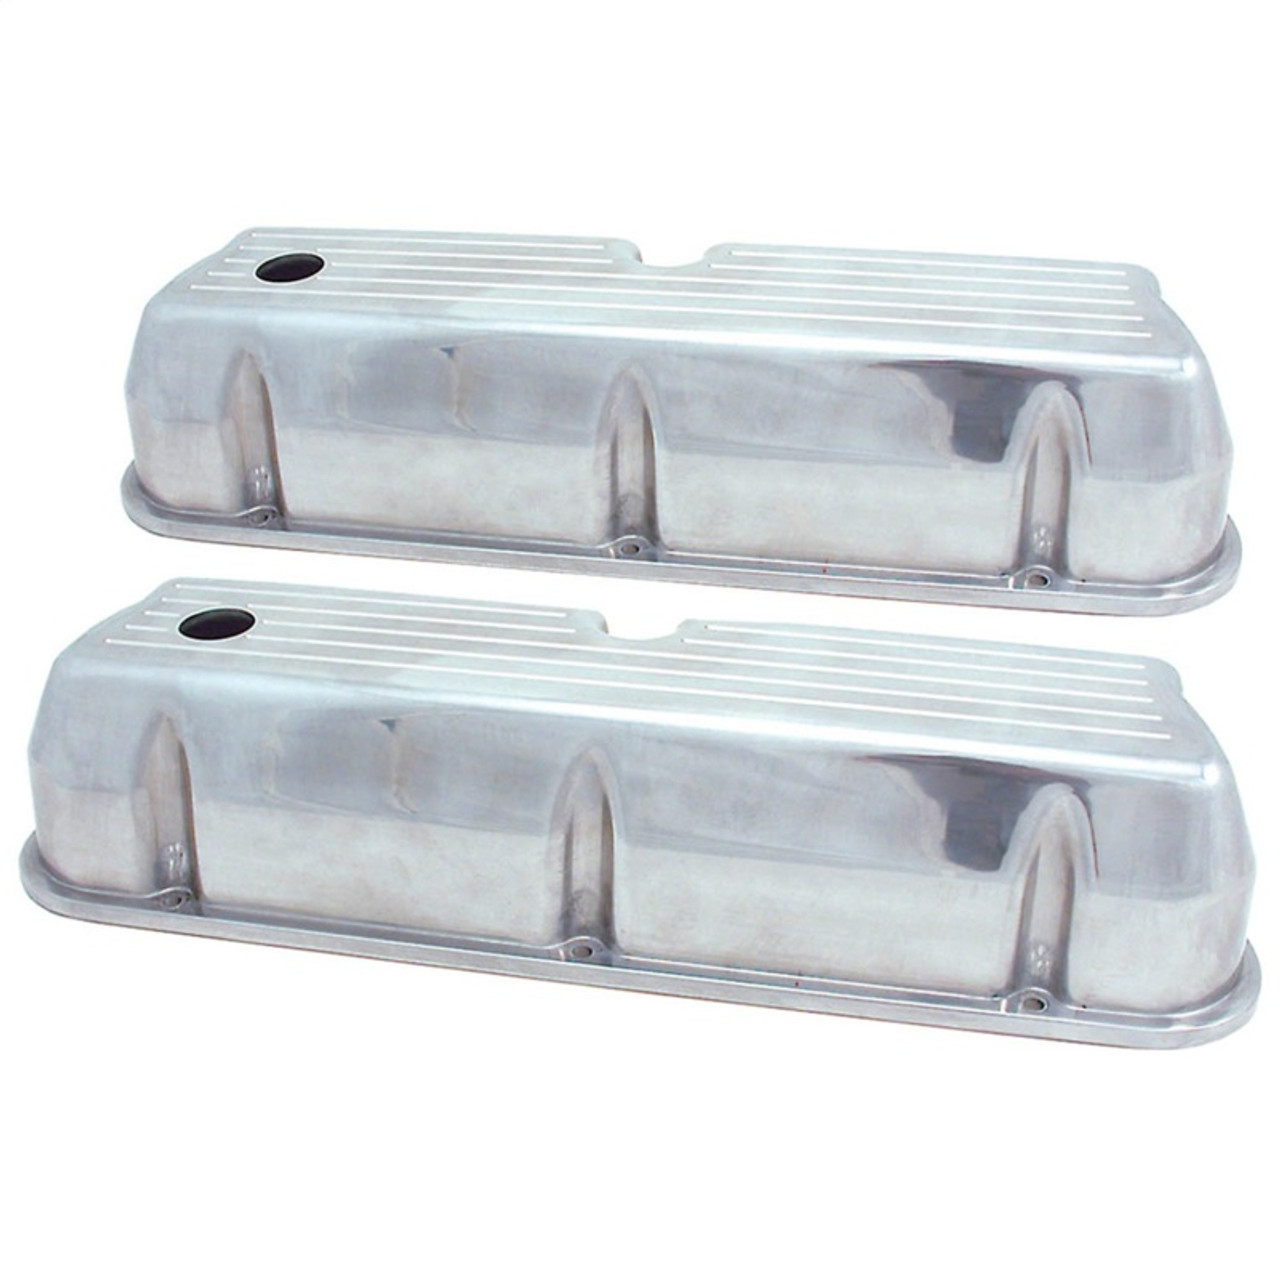 Spectre SB Ford Tall Ball Milled Valve Cover Set Polished Aluminum 5019  Fidanza Performance